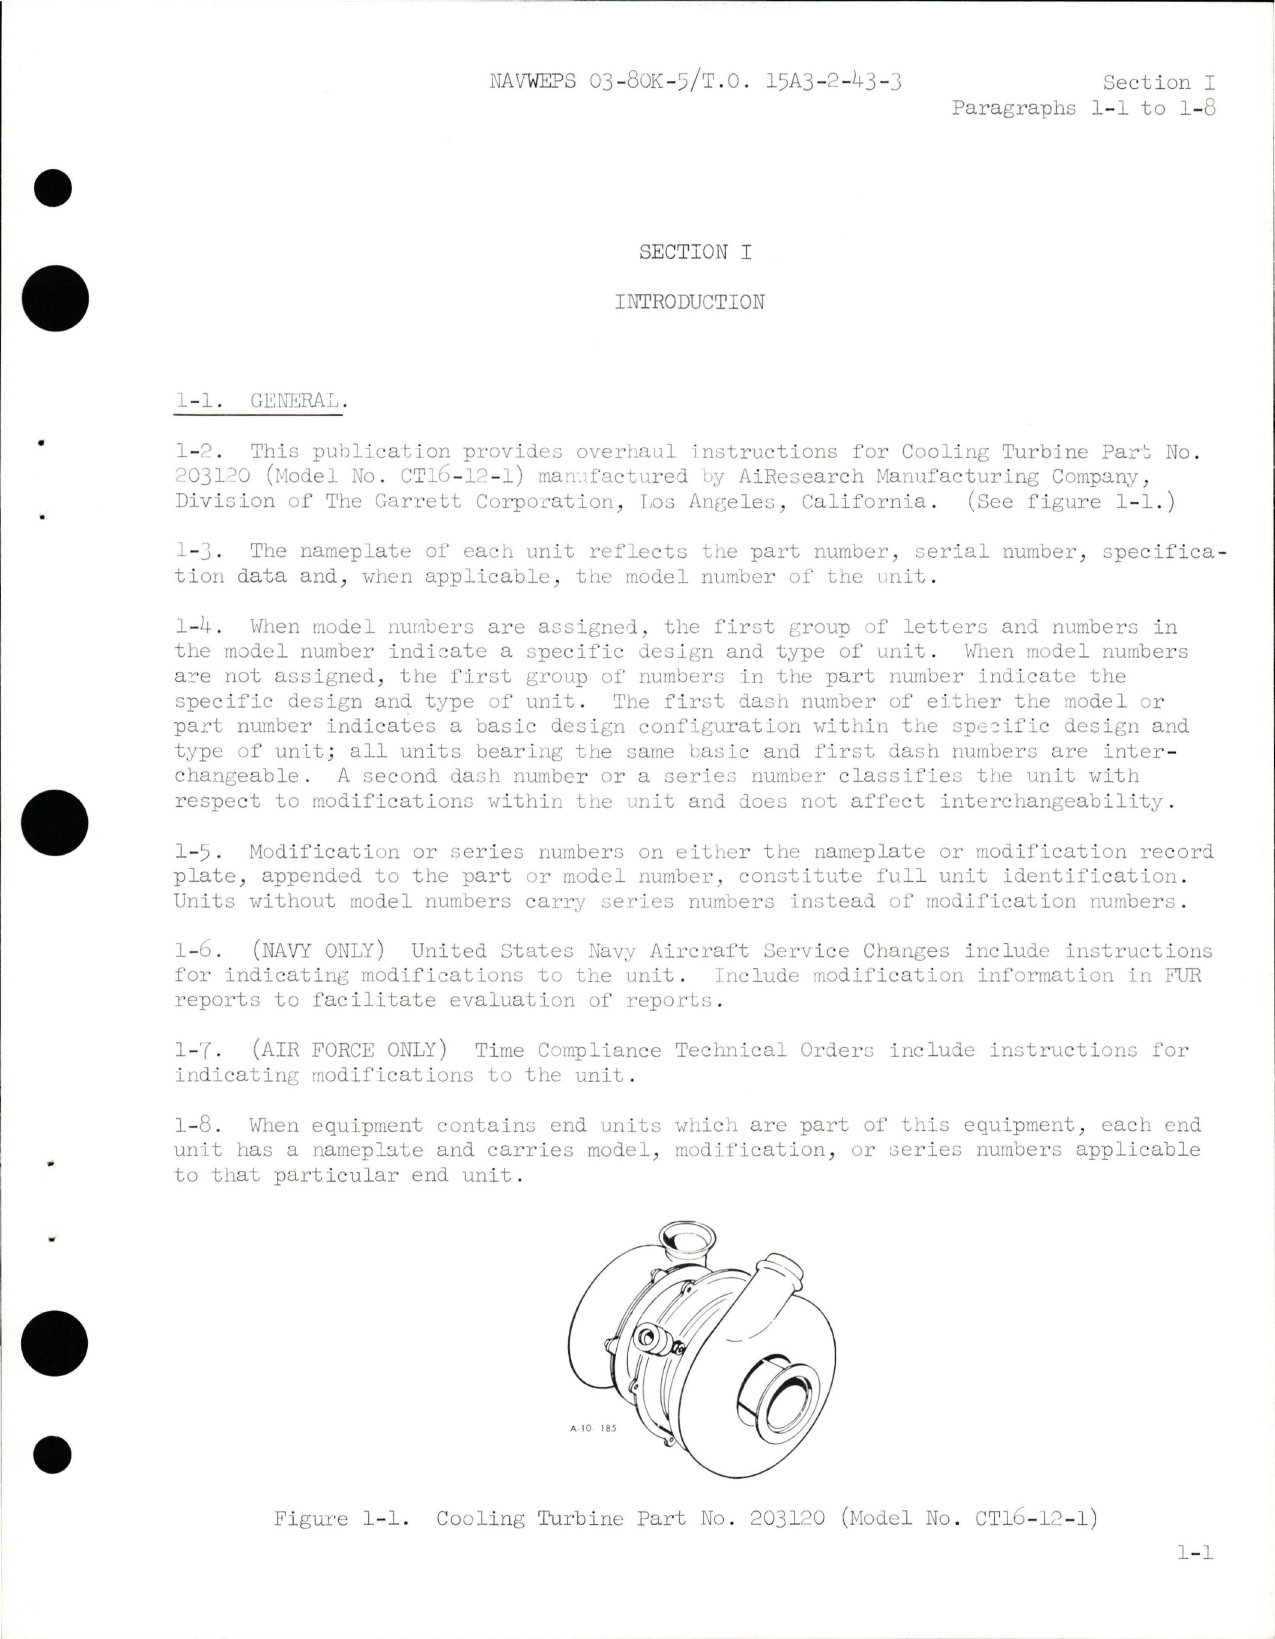 Sample page 5 from AirCorps Library document: Overhaul Instructions for Cooling Turbines - Parts 203120, 203130, and 204480-1-1